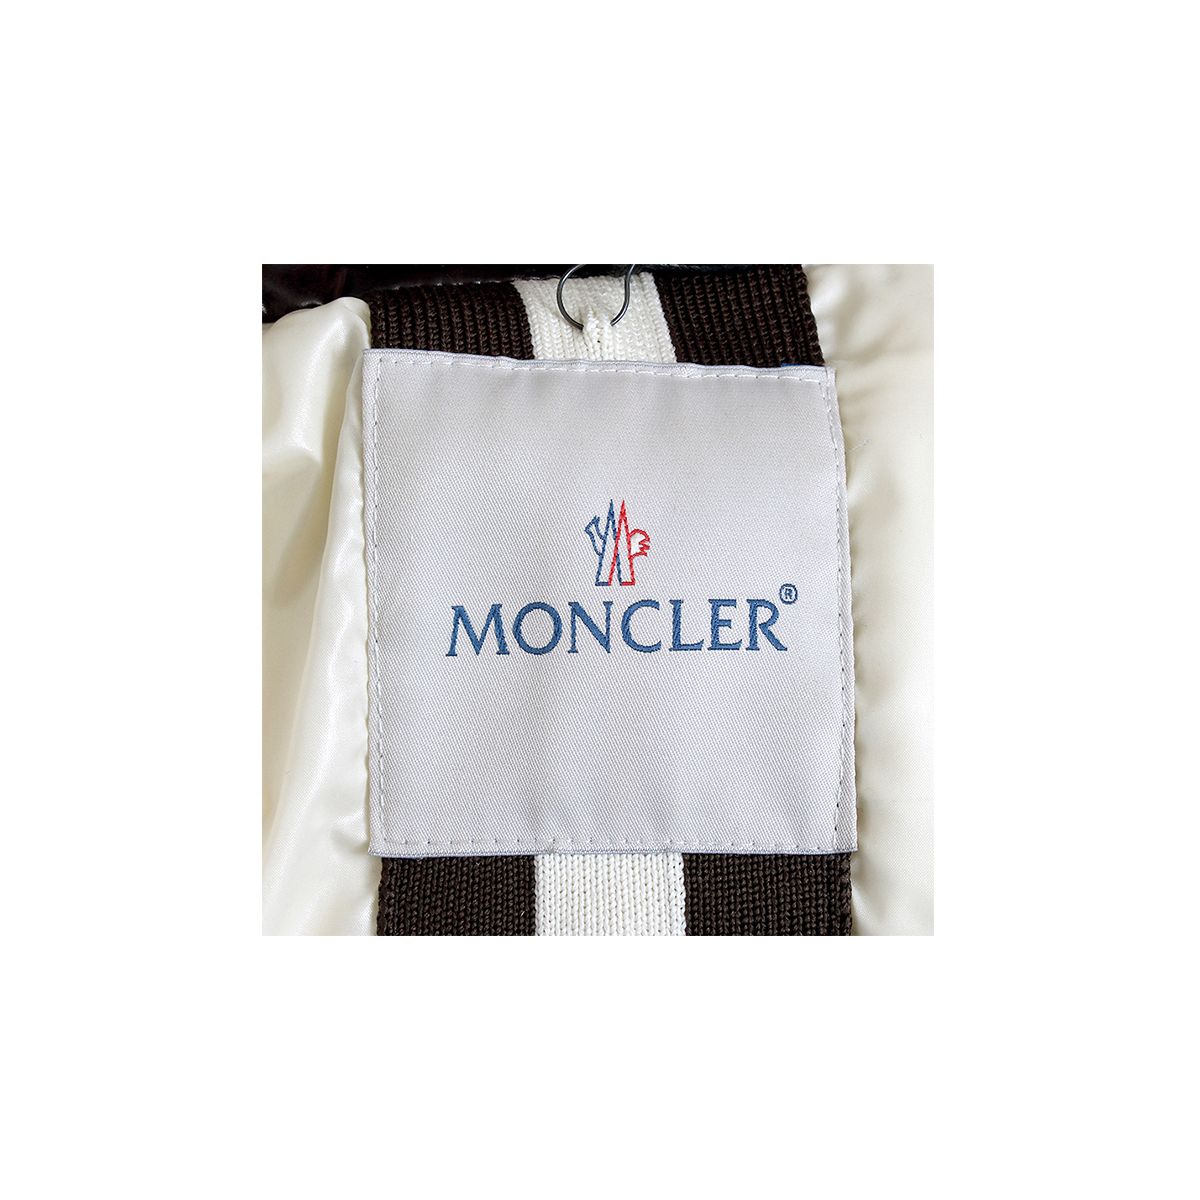 Moncler 'Quincy' Hooded Down Jacket